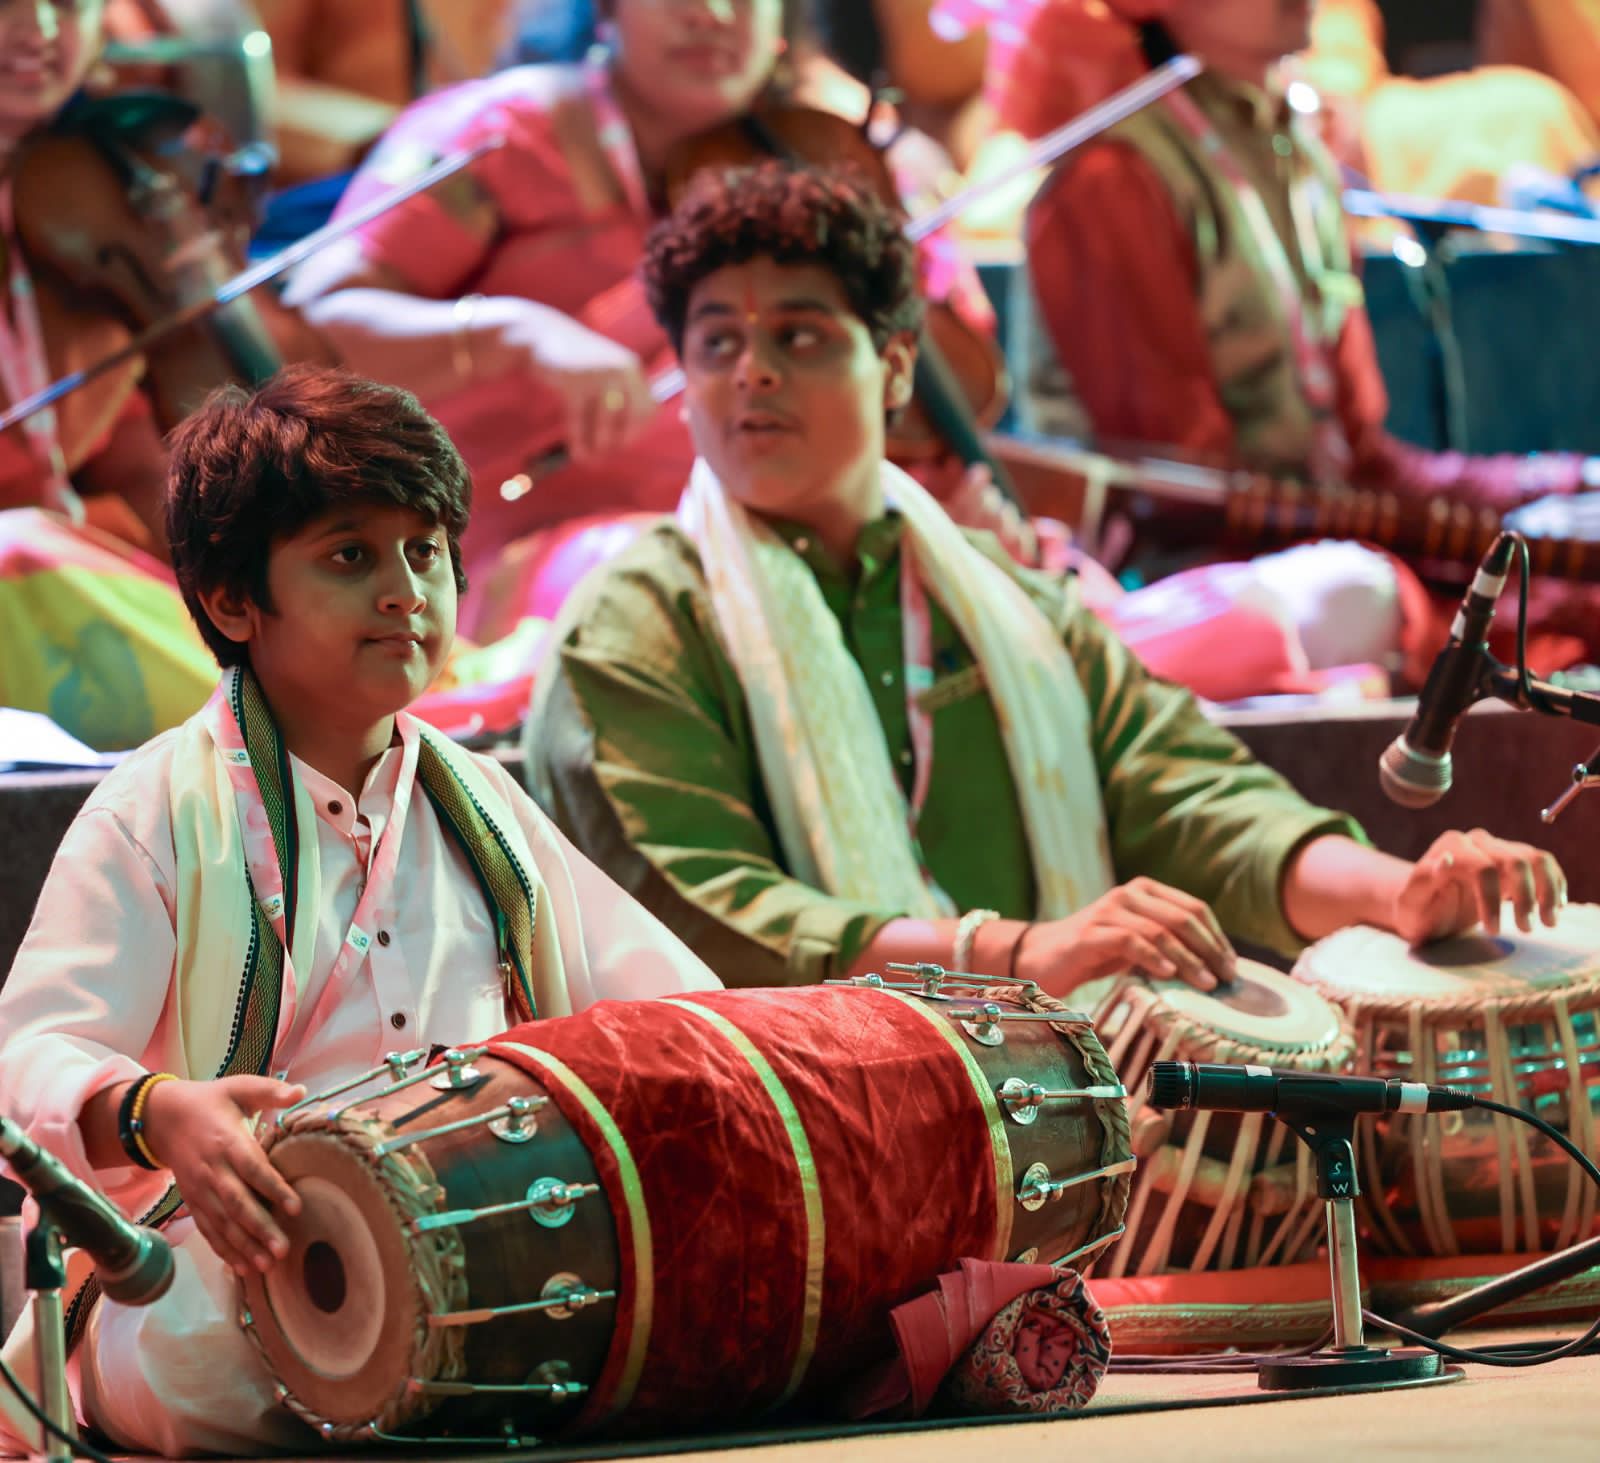 G20 Summit 2023: India showed the world a glimpse of its musical heritage at the G20 dinner-rag